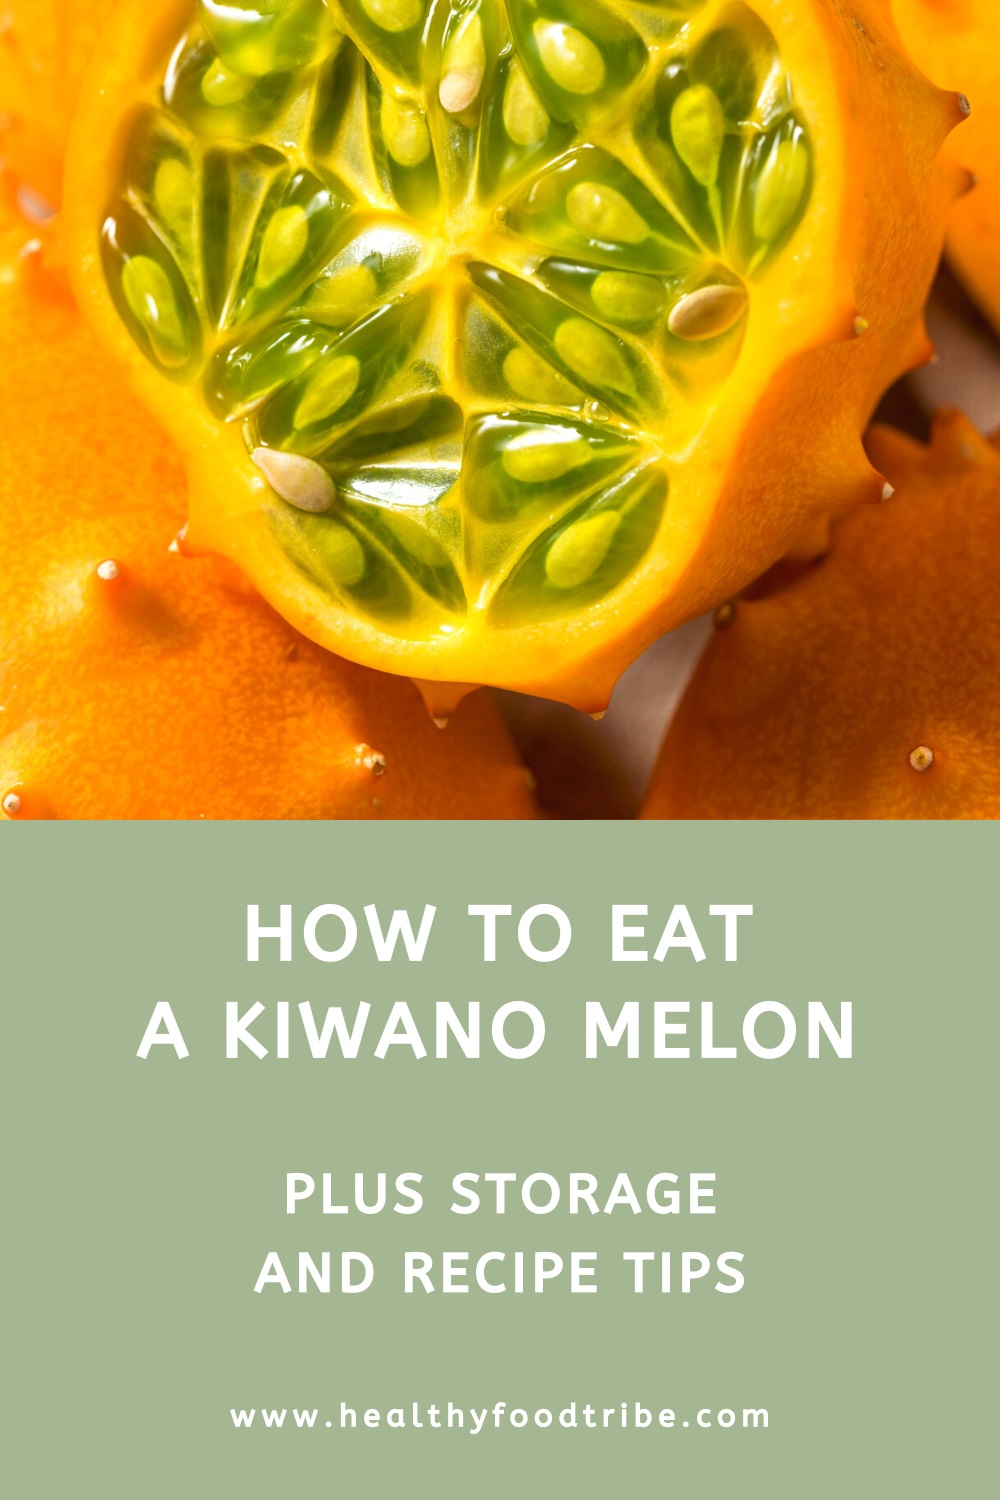 How to eat a kiwano melon (plus storage and recipe tips)